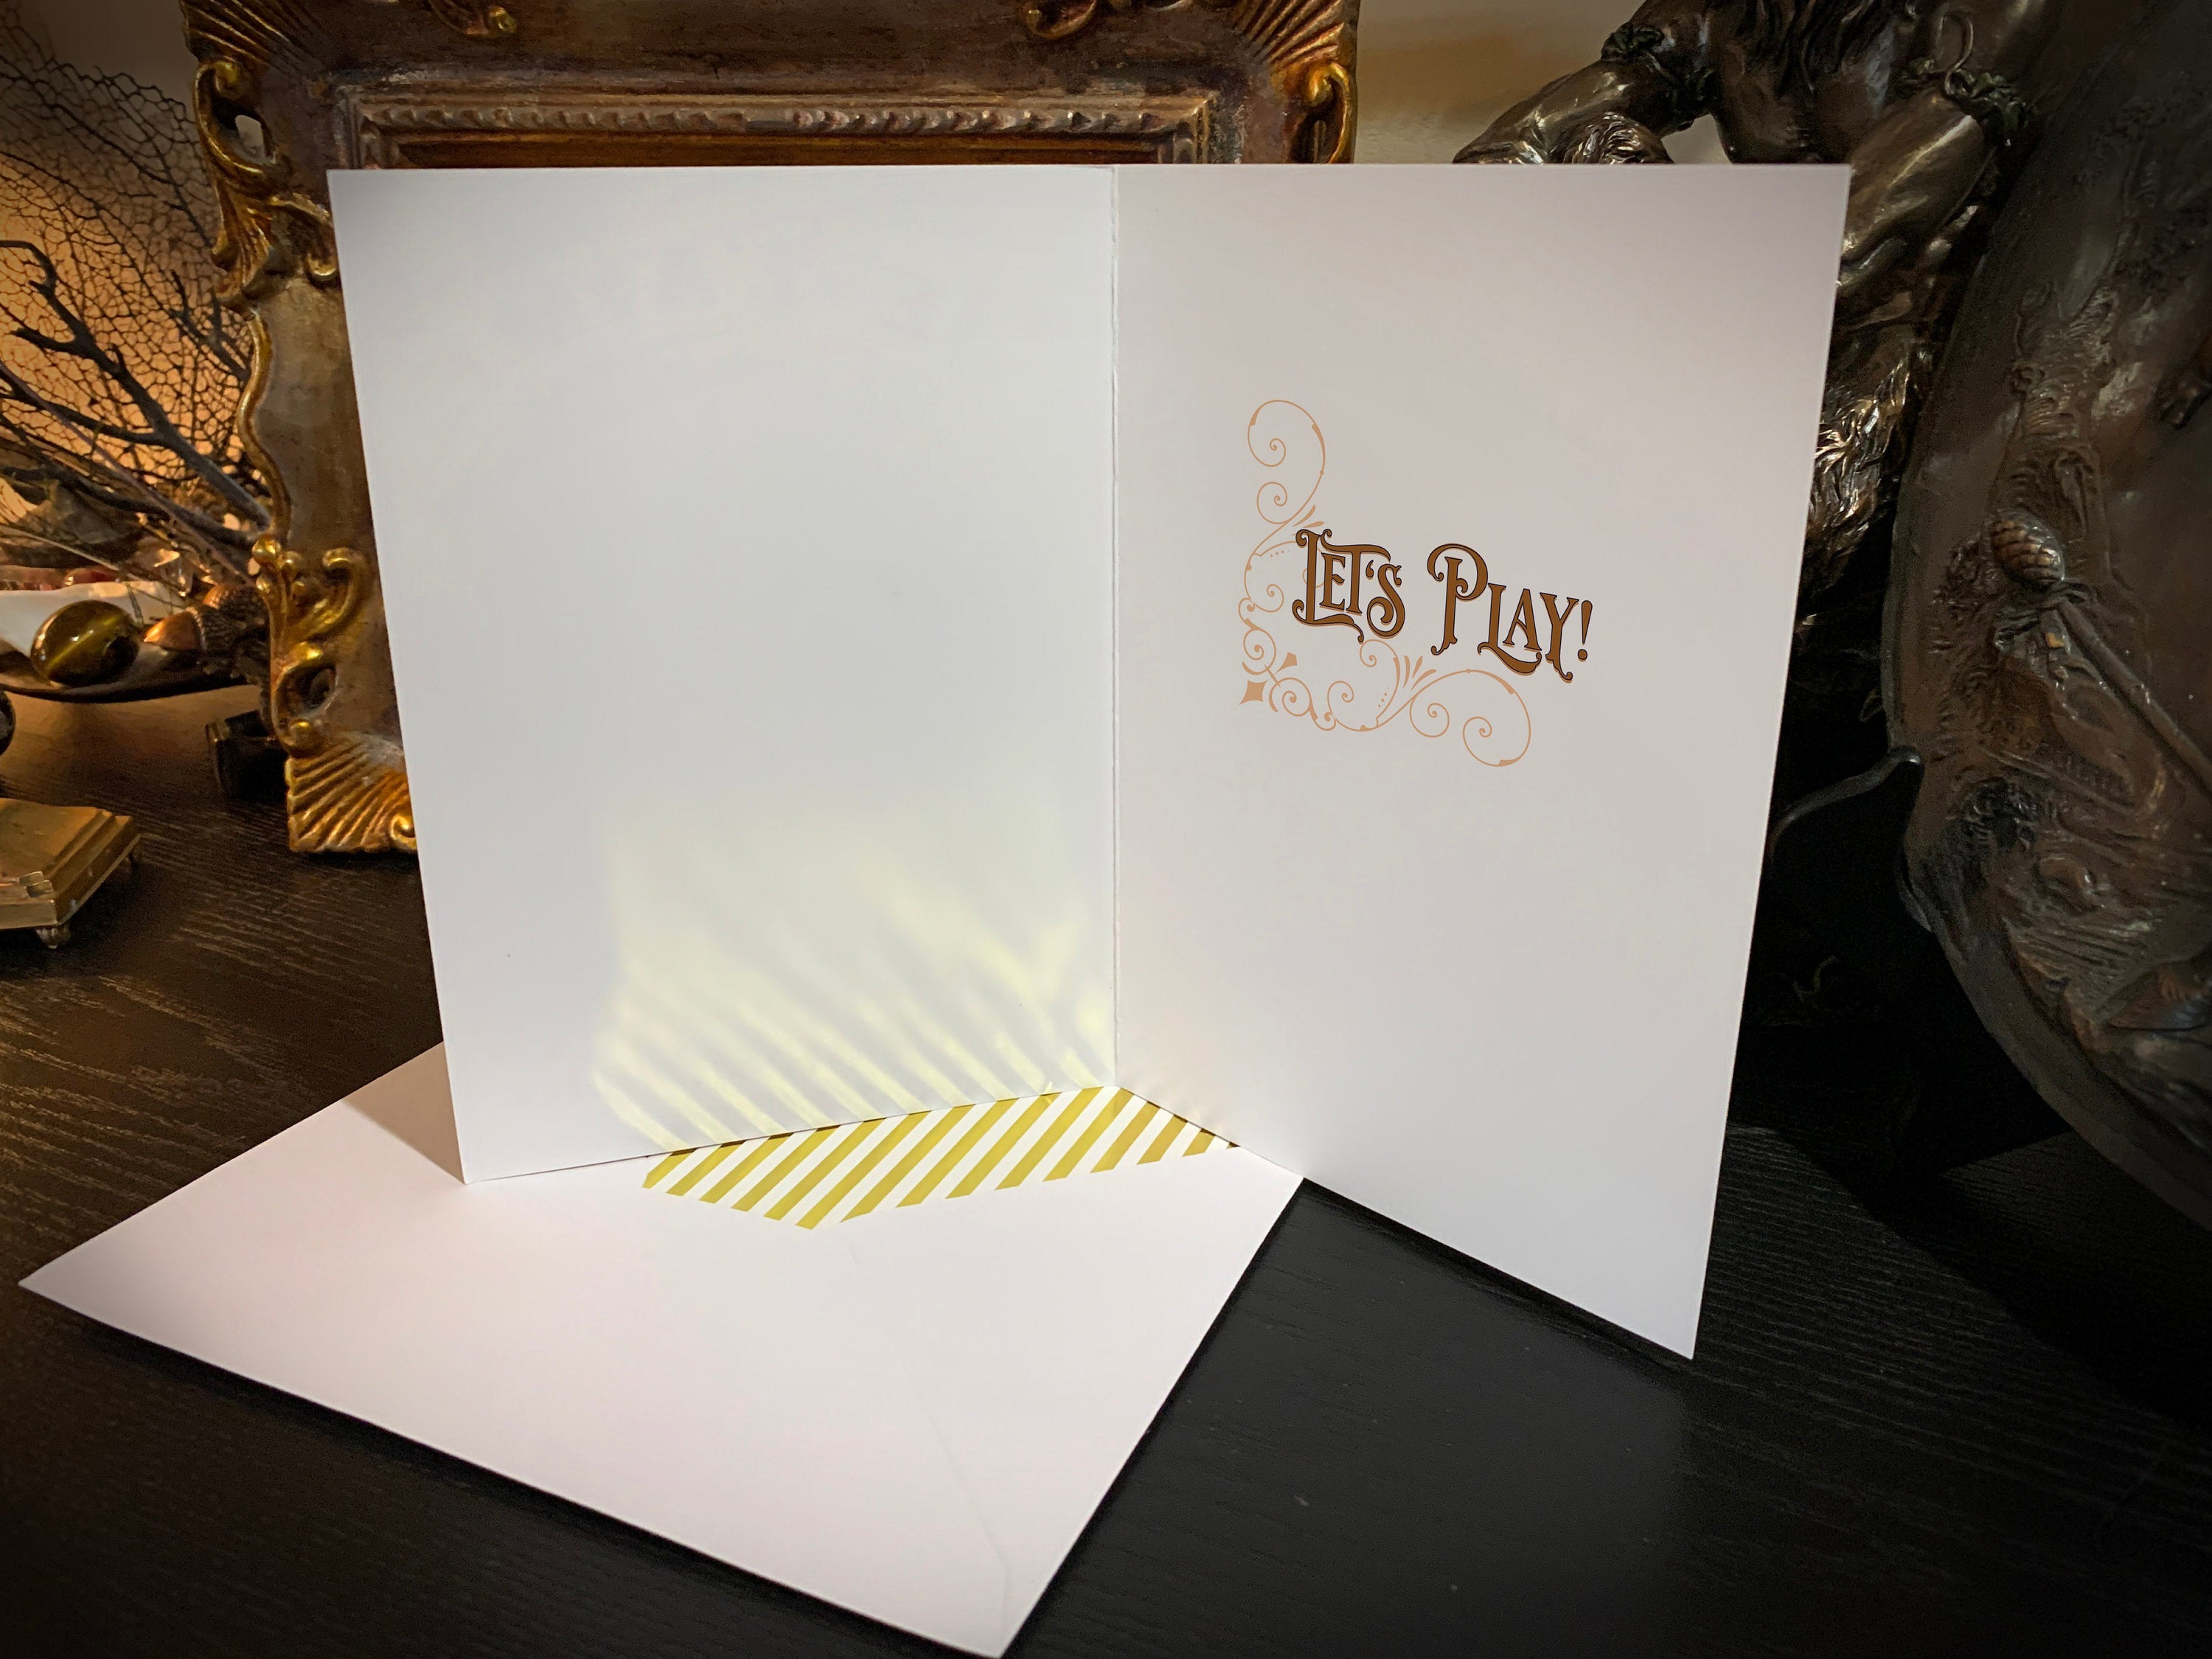 Let's Play!, Victorian Valentine's Day Greeting Card for Gamers with Elegant Gold Foil Envelope